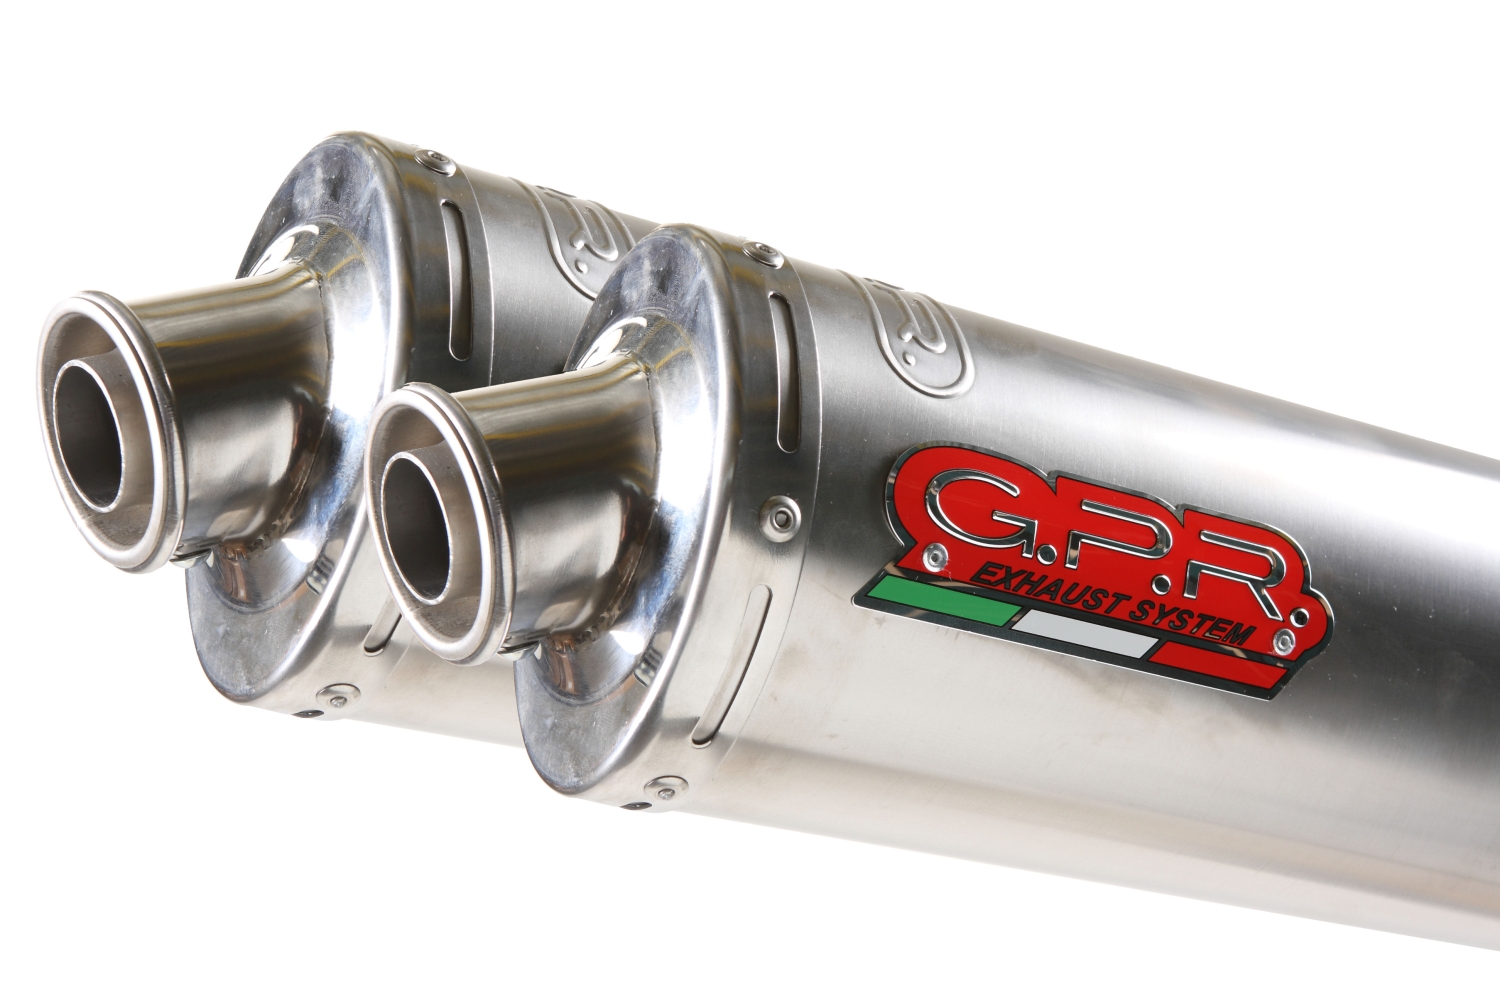 Exhaust system compatible with Ducati Monster S4R 2003-2007, Titanium Tondo / Round, Dual Homologated legal slip-on exhaust including removable db killers and link pipes 